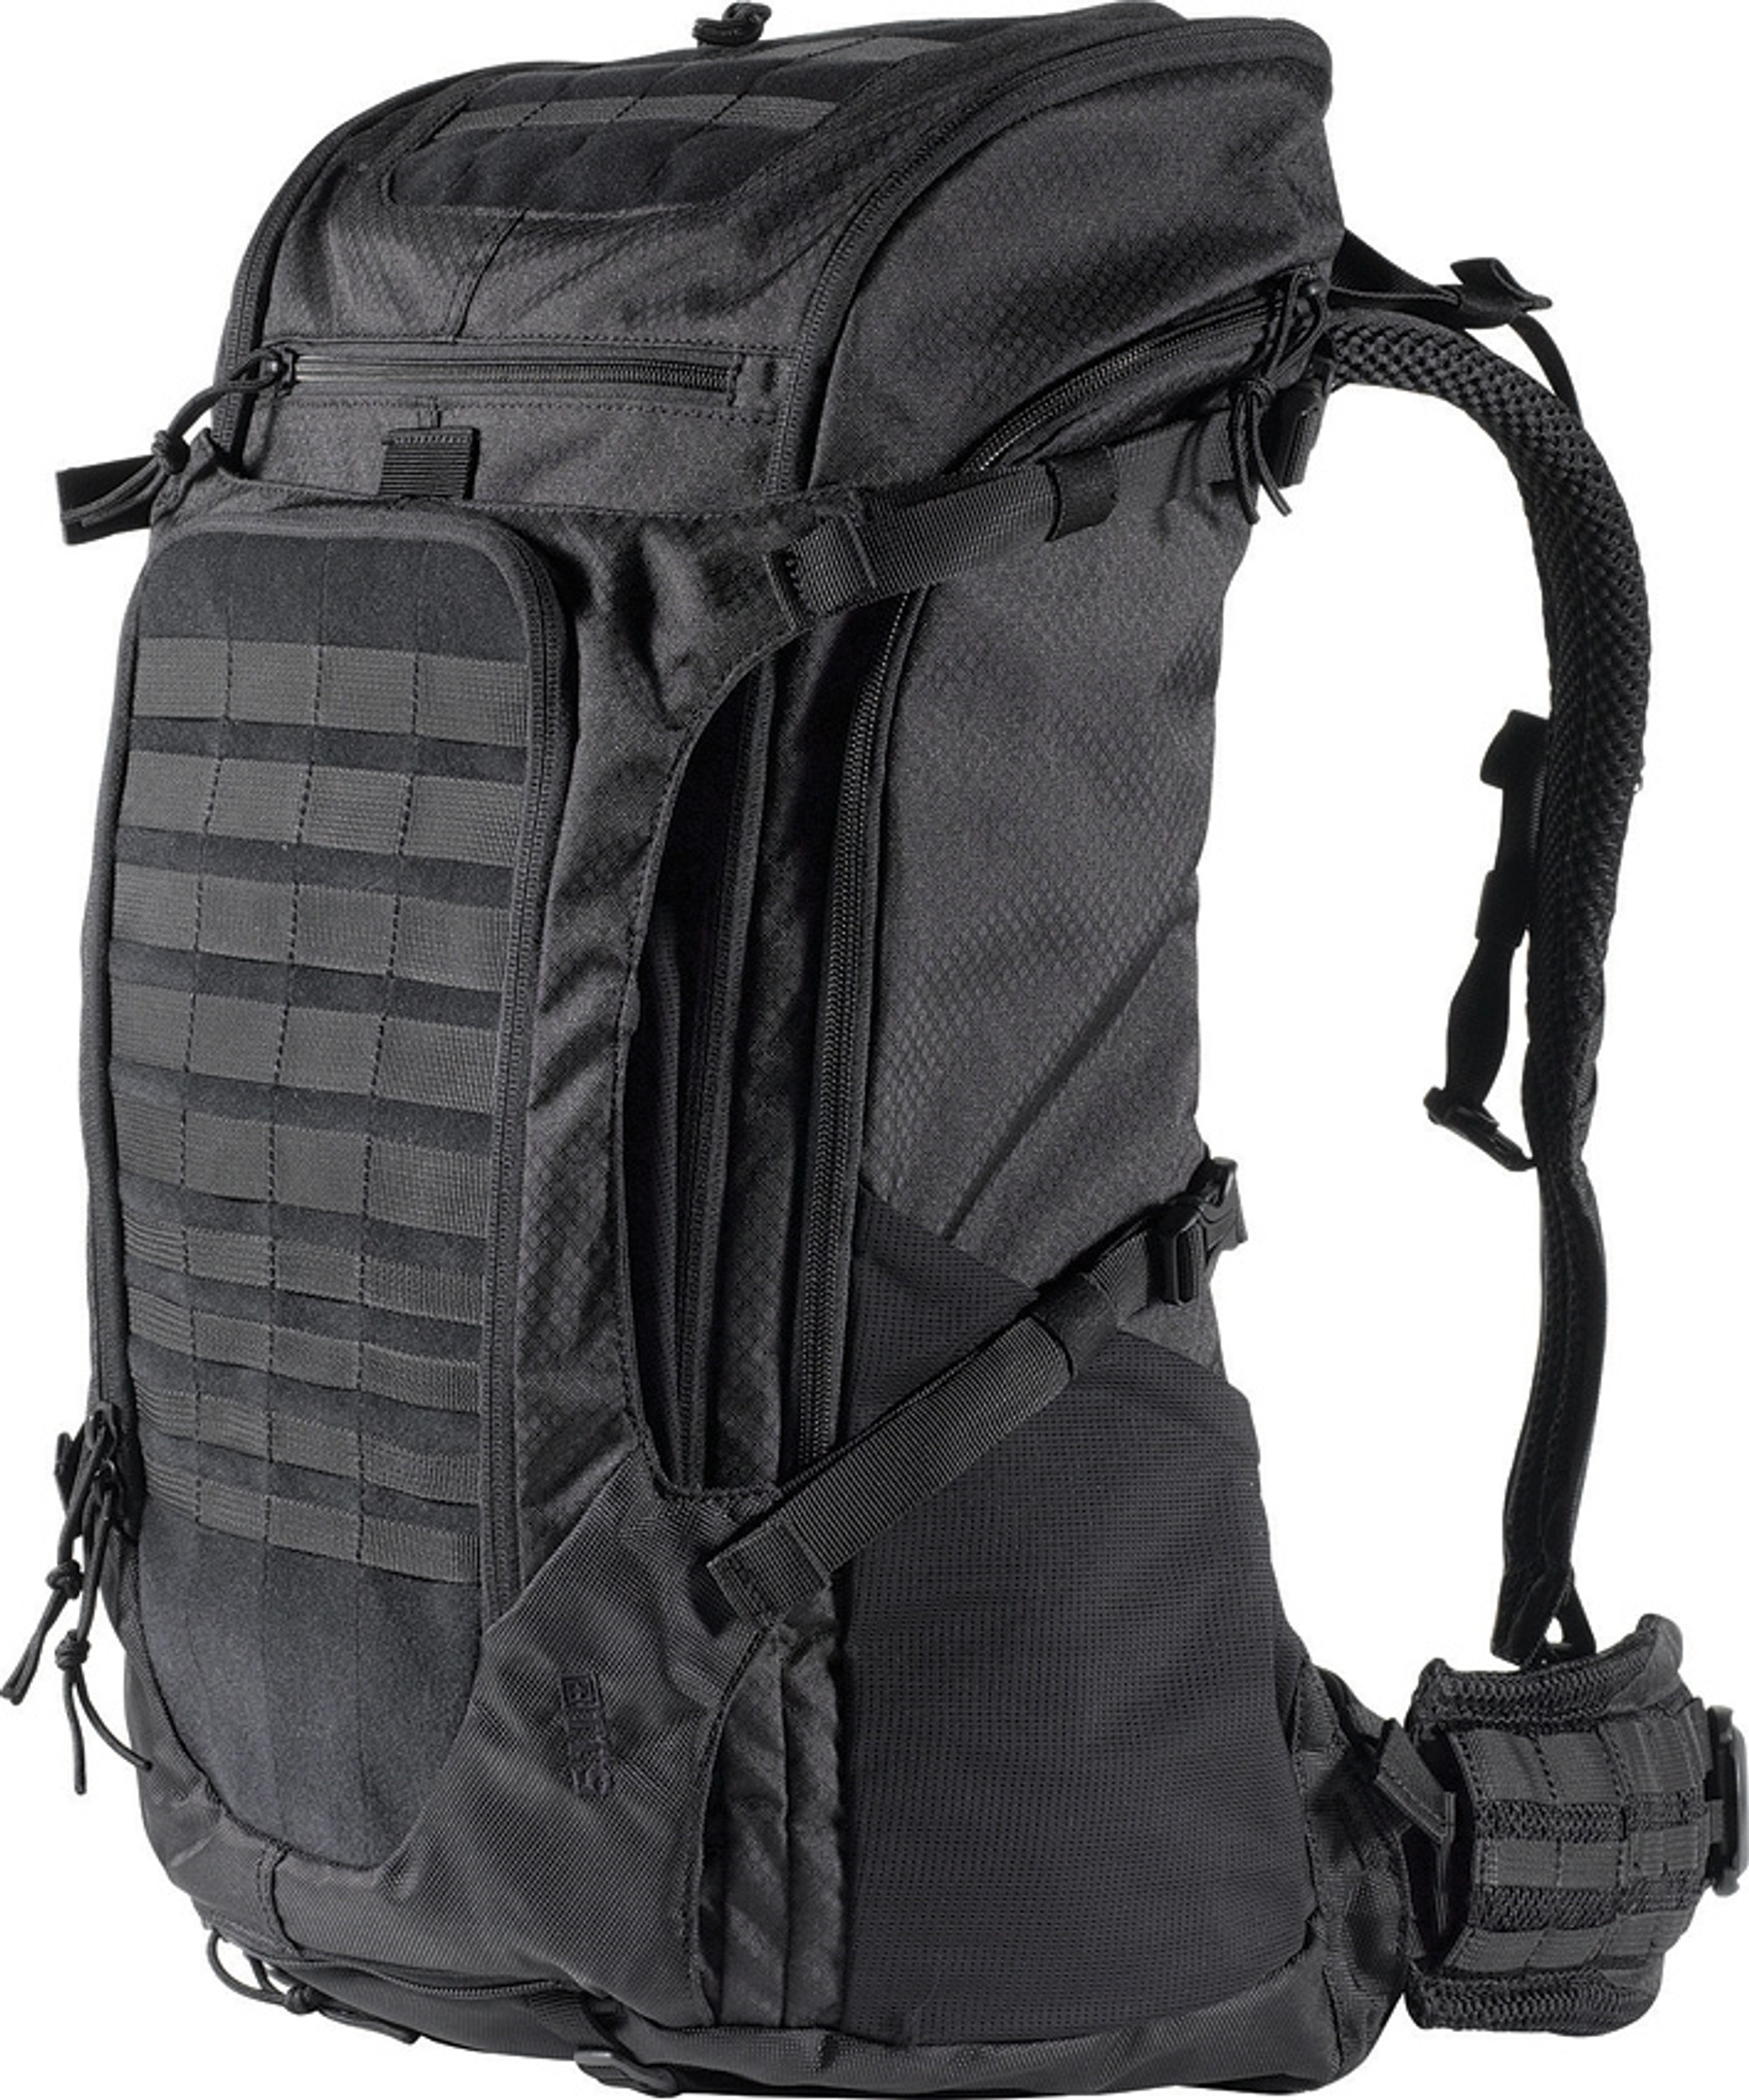 Ignitor 16 Backpack FTL56149